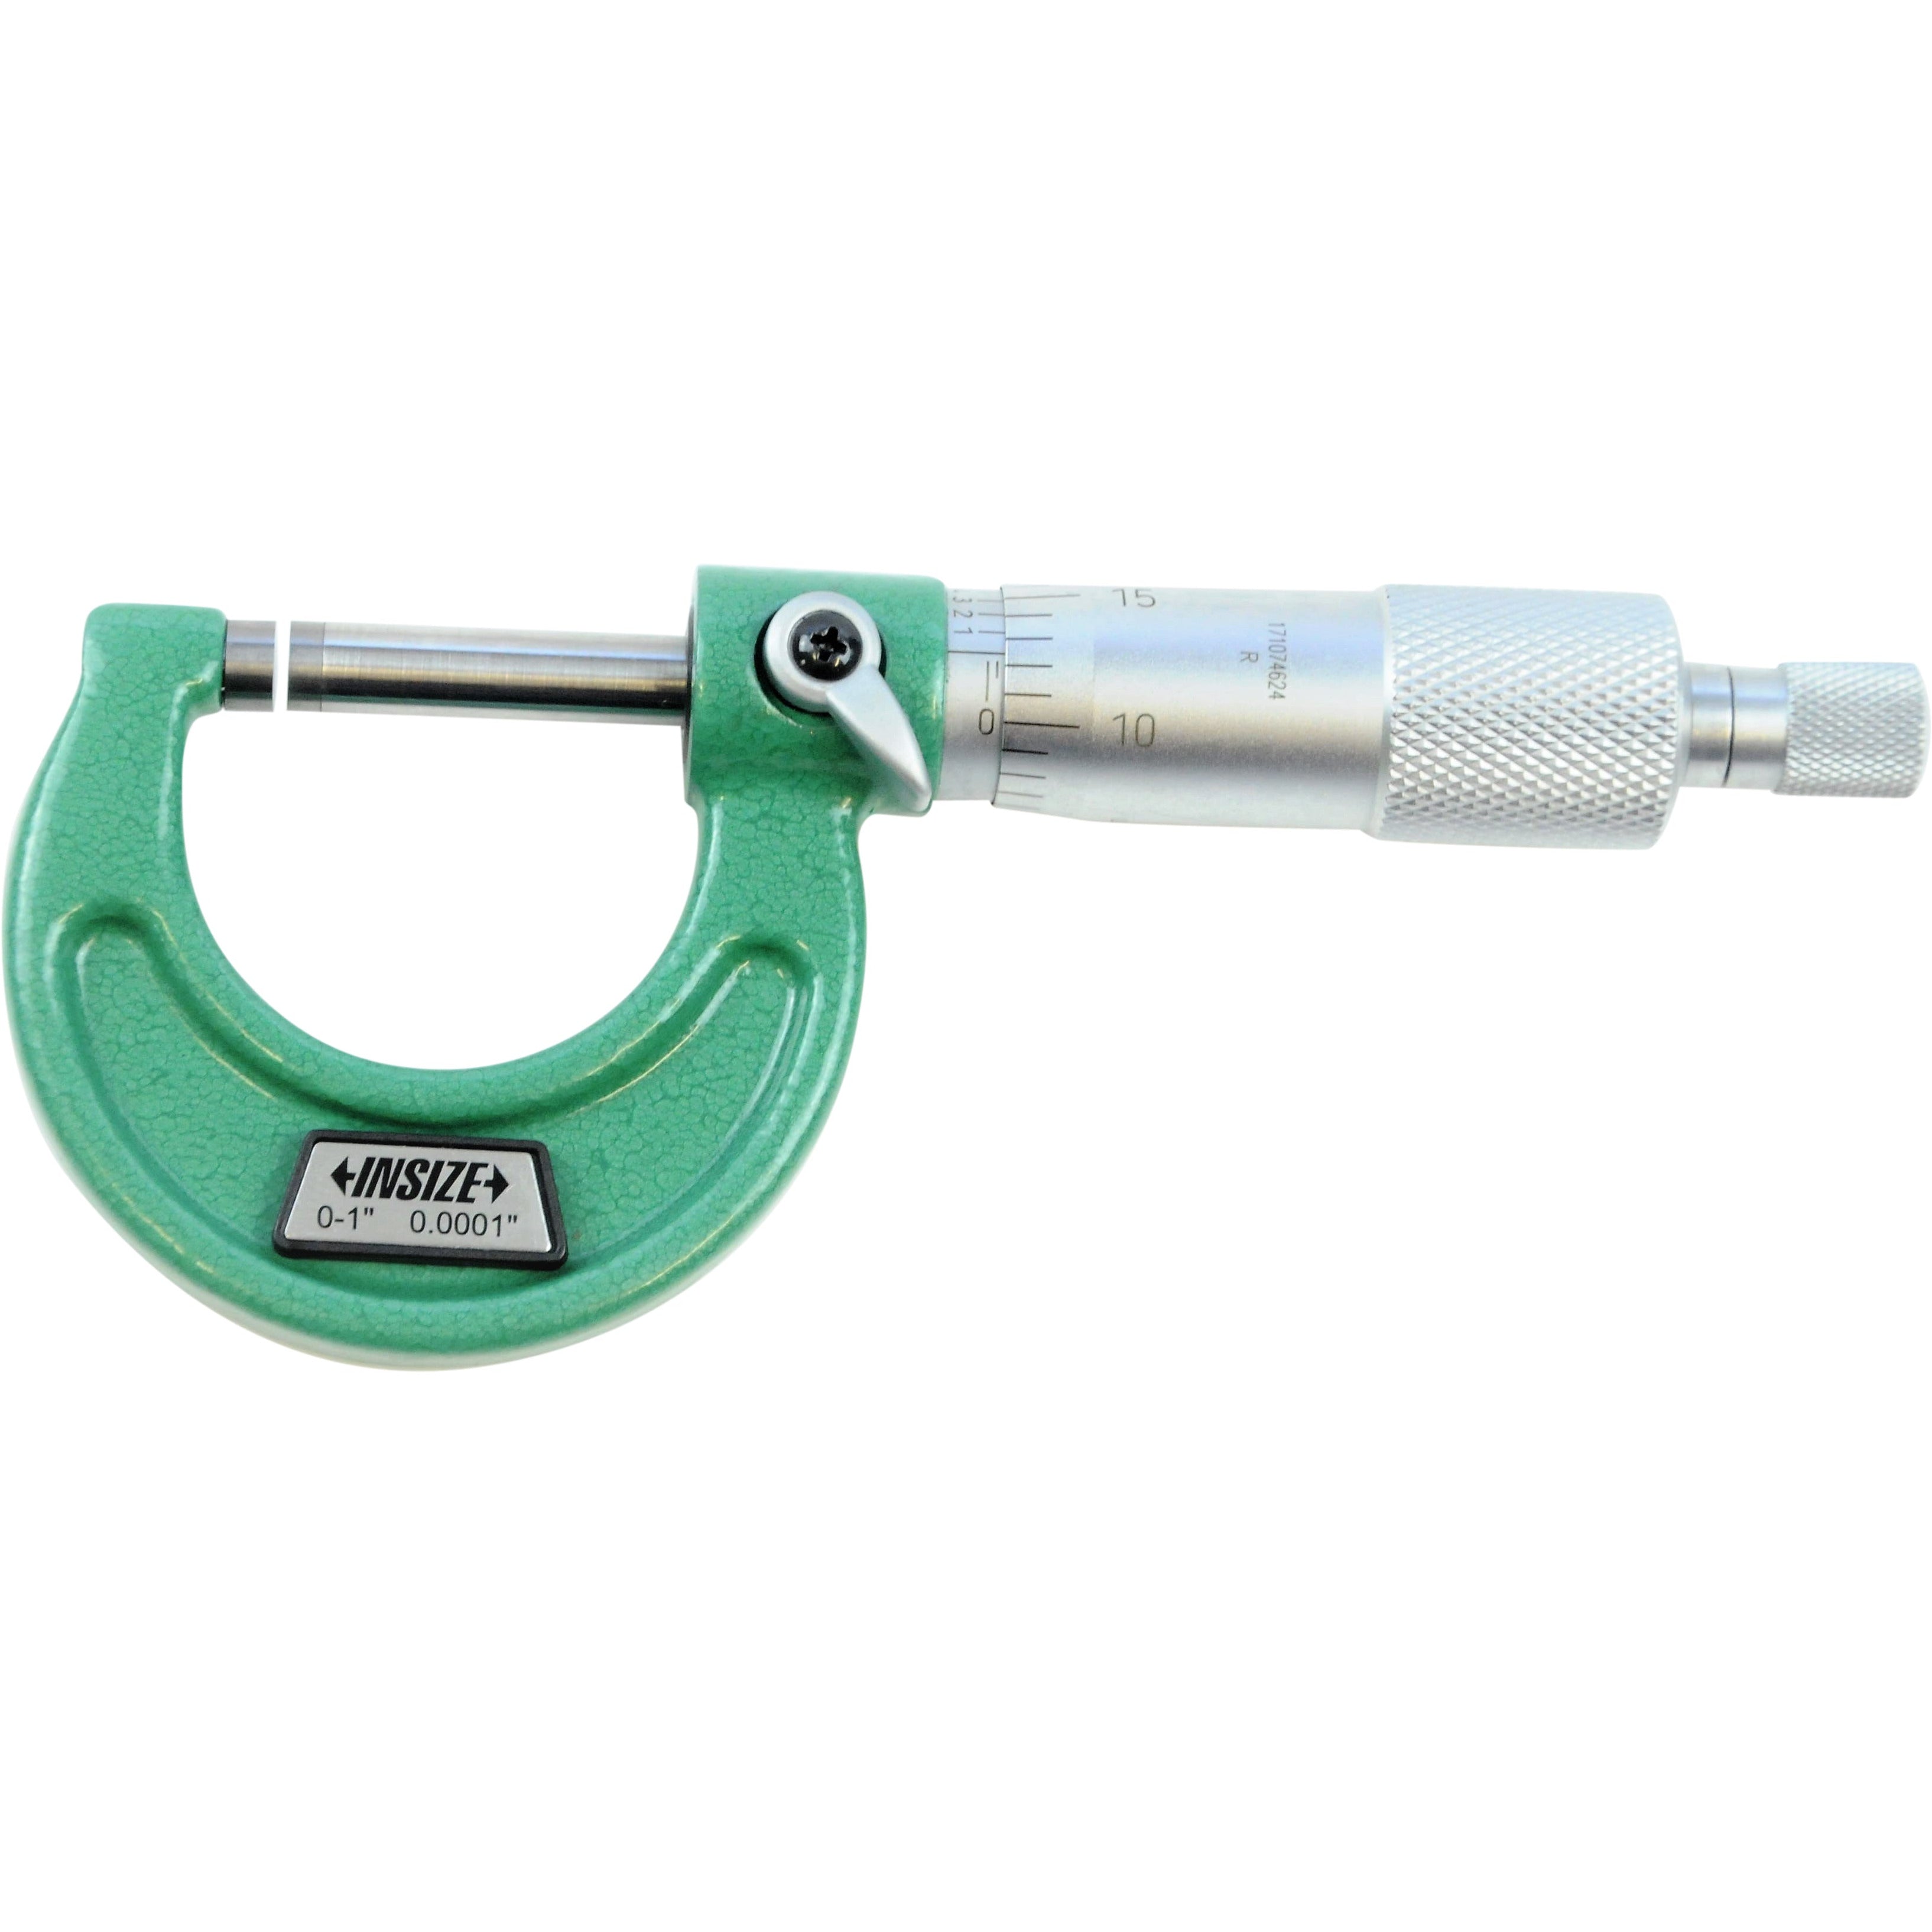 Insize Imperial Outside Micrometer 0-1" Range Series 3203-1A